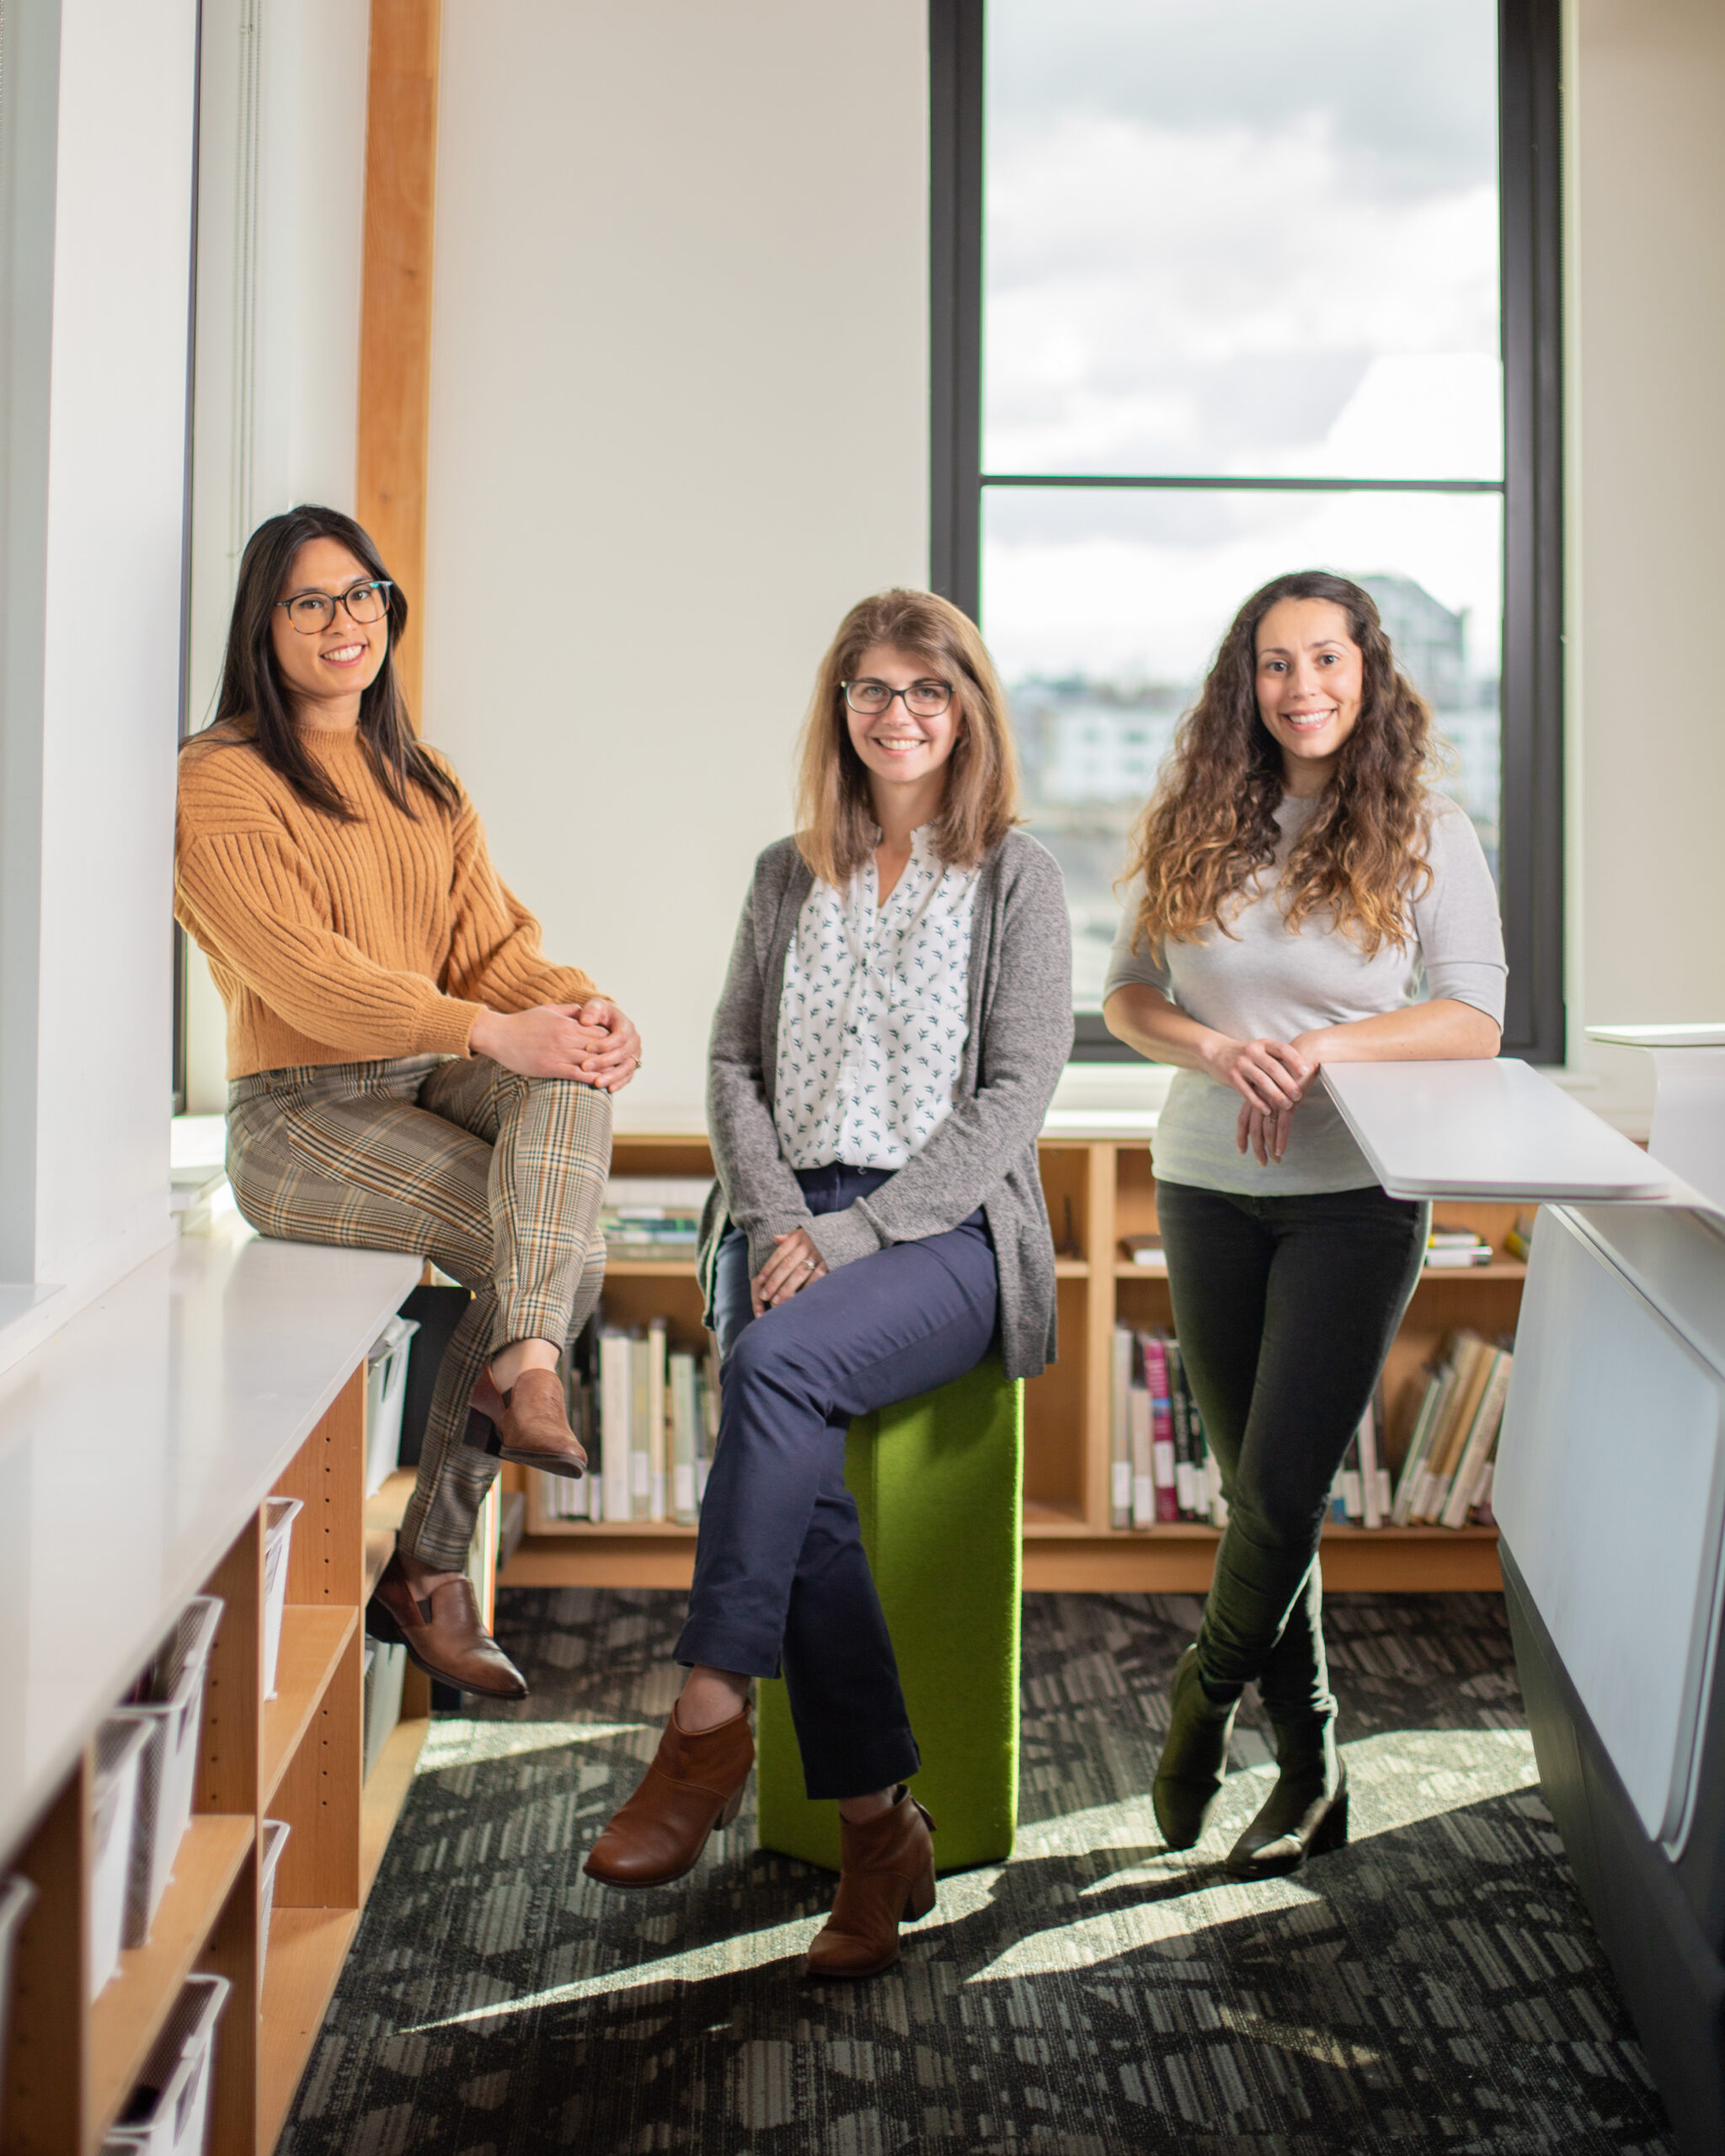 Amanda Lunger, Stephanie Hollar, and Elisa Zenk in the Portland office.